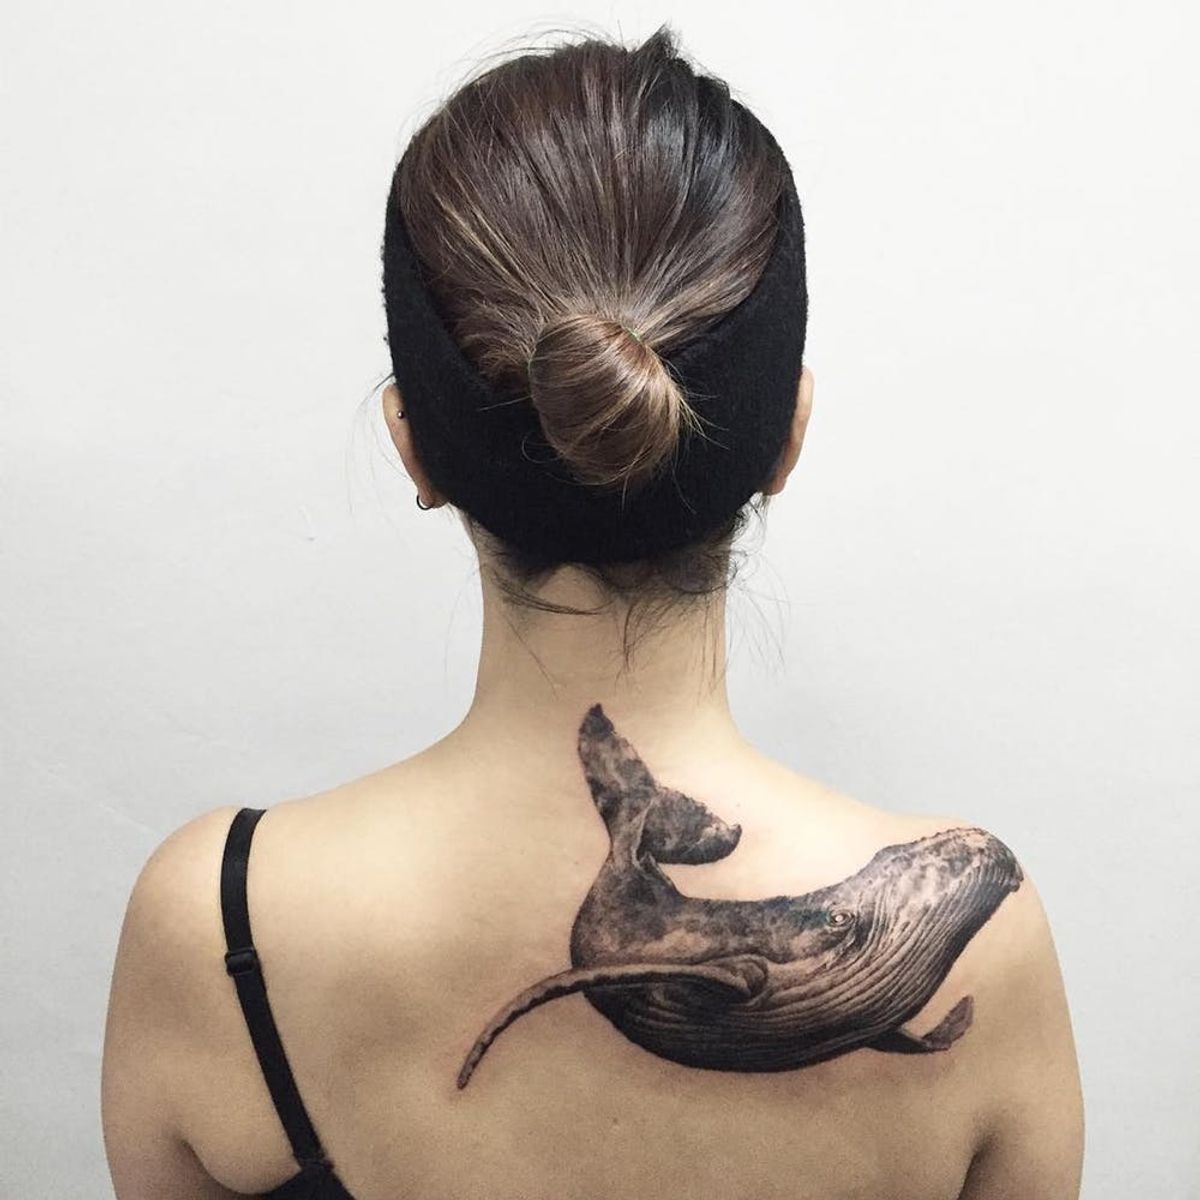 16 Meaningful Tattoos for Pisces